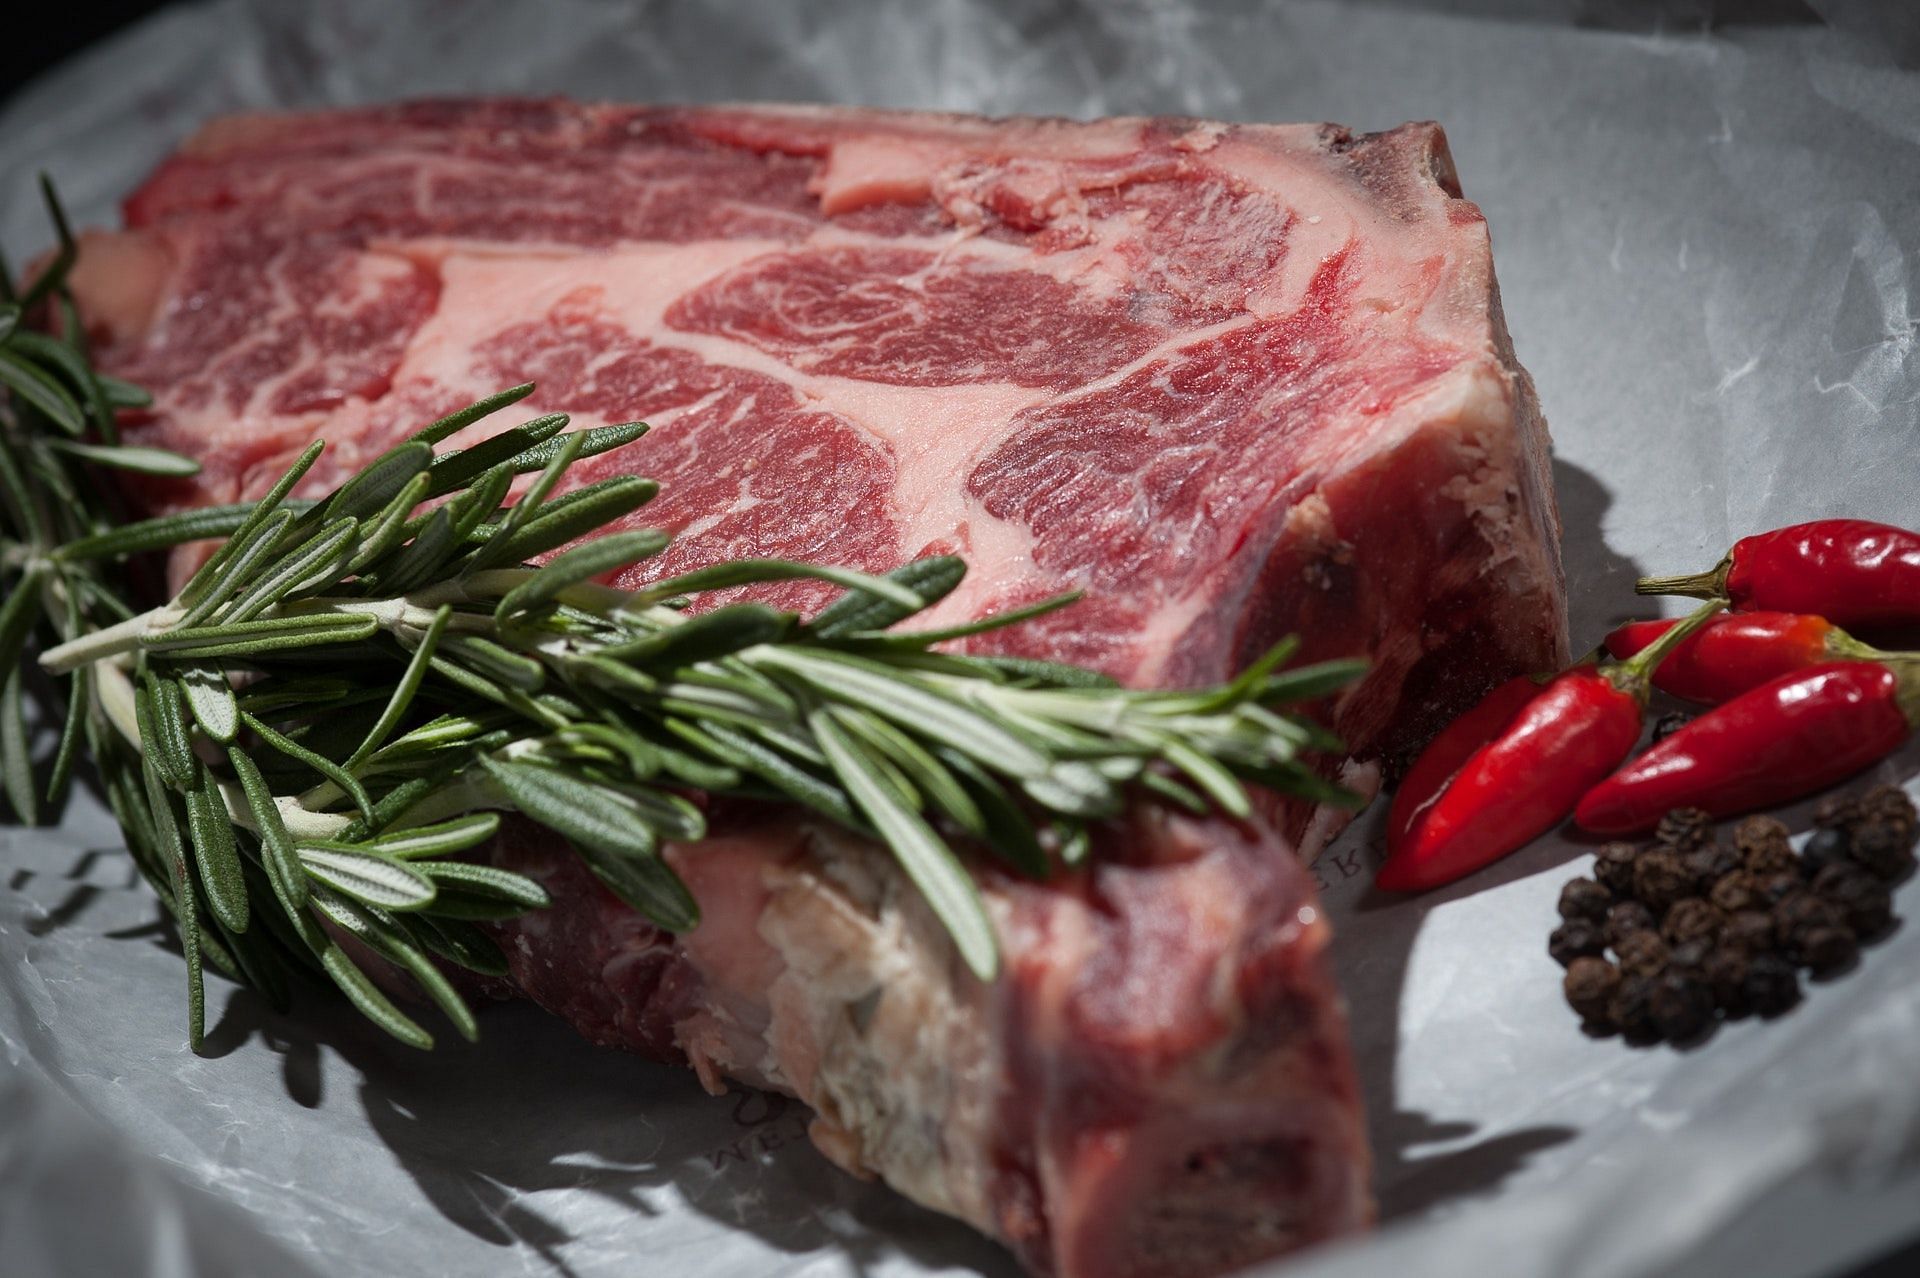 Red meats are among the top high-calorie foods for weight gain. (Photo via Pexels/Mali Maeder)